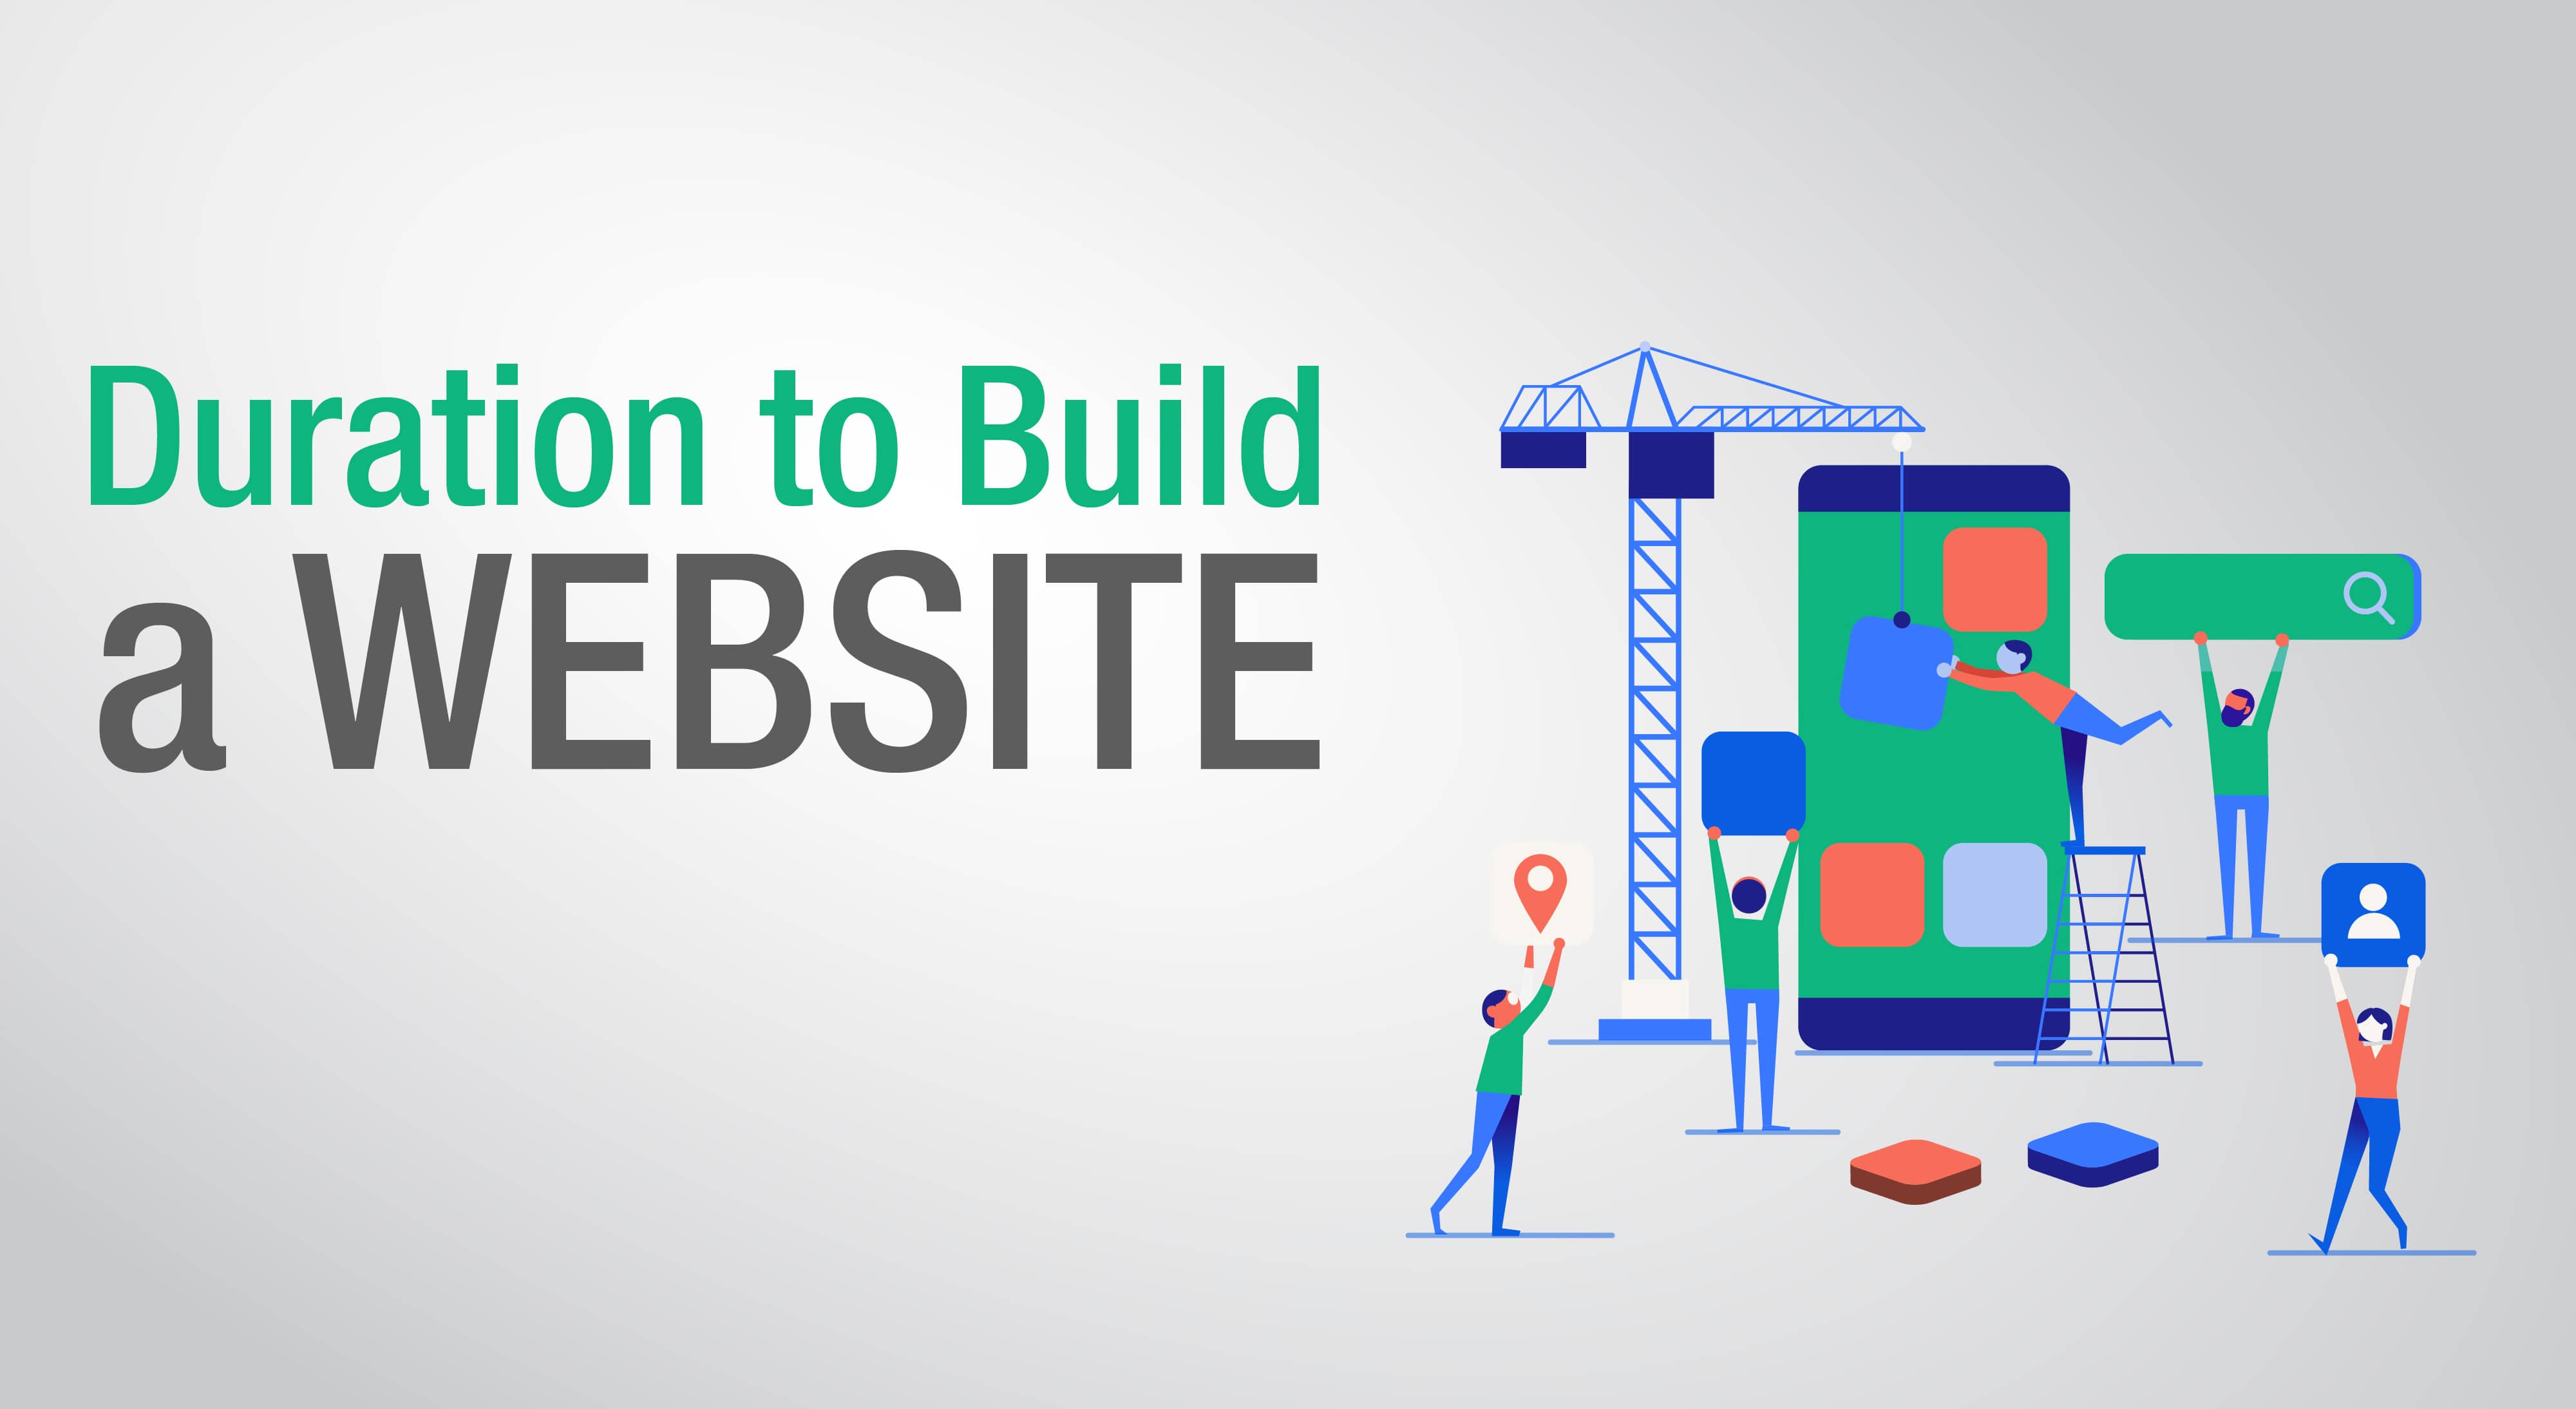 Time and Duration to Build Website